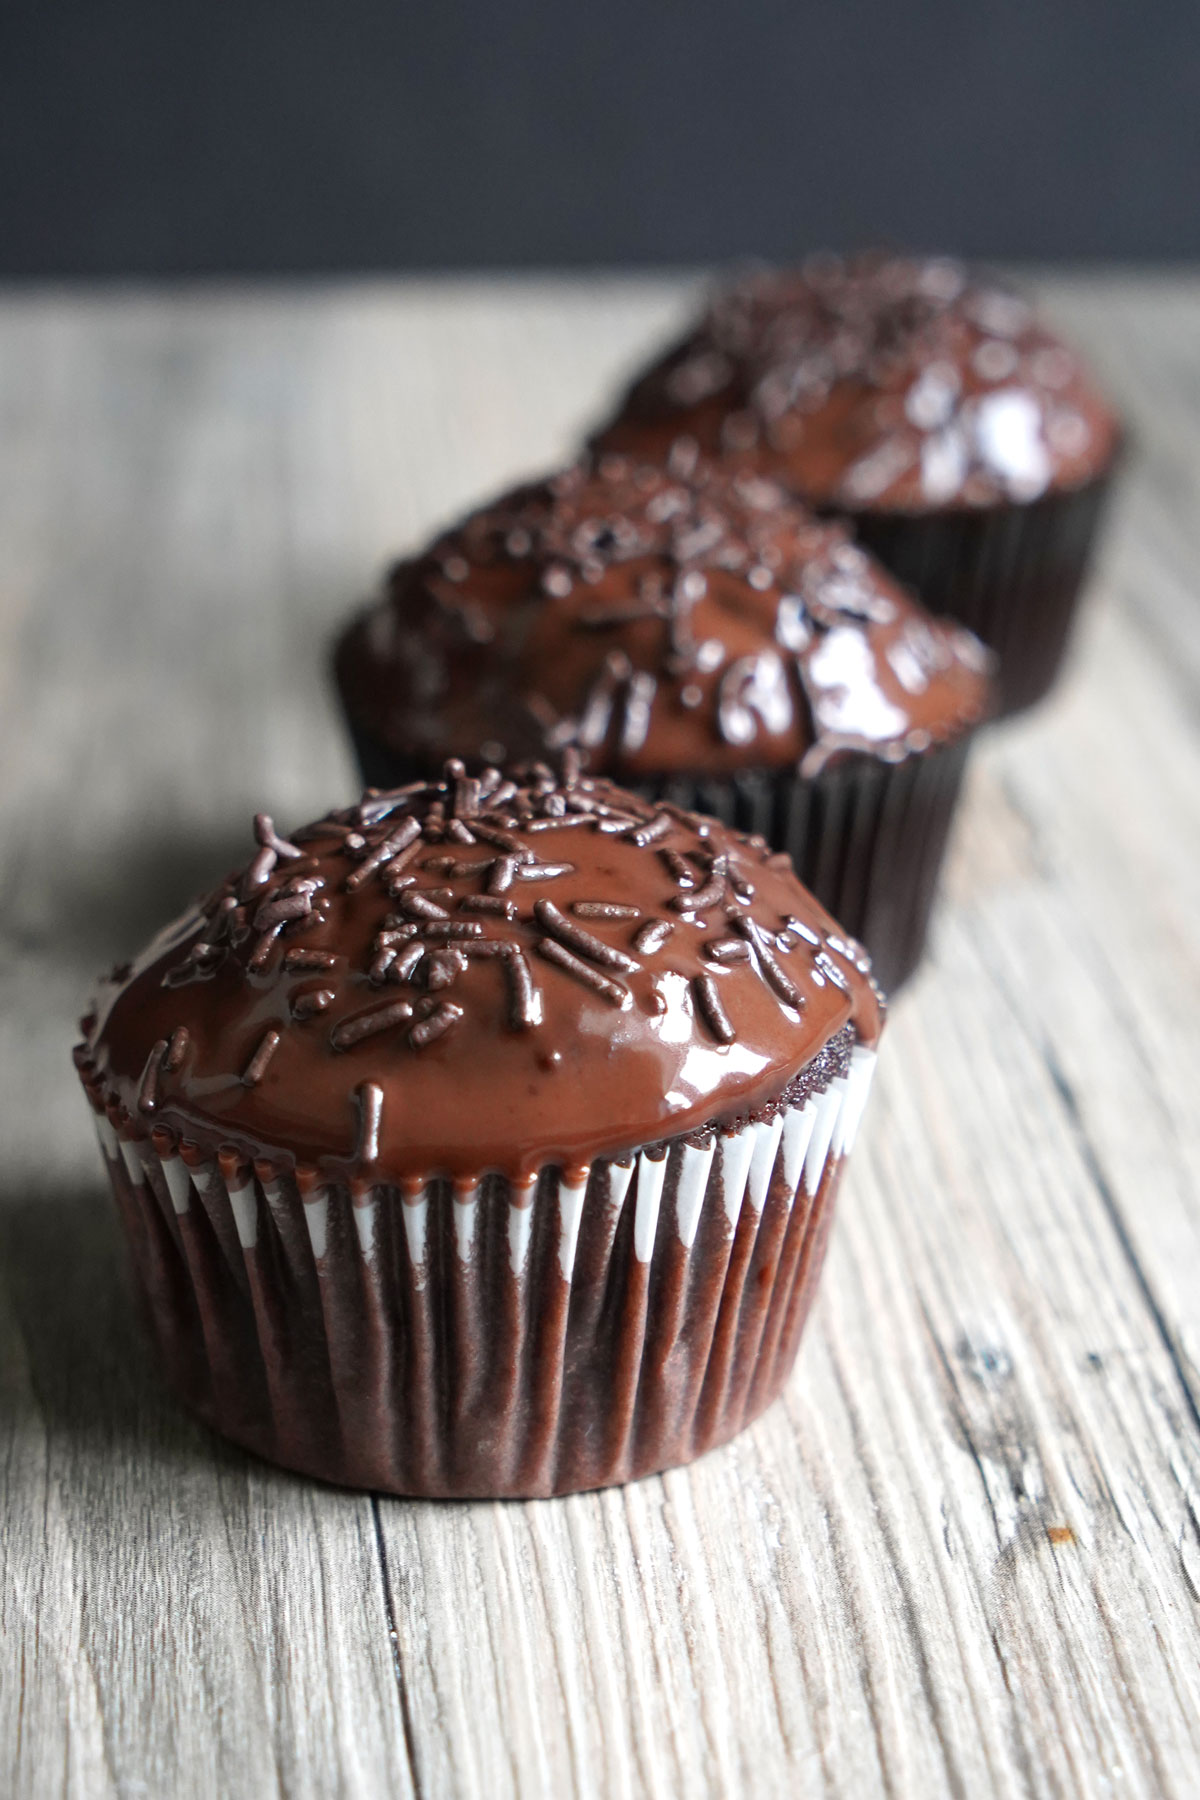 Three chocolate ganache cupcakes lined up in row.